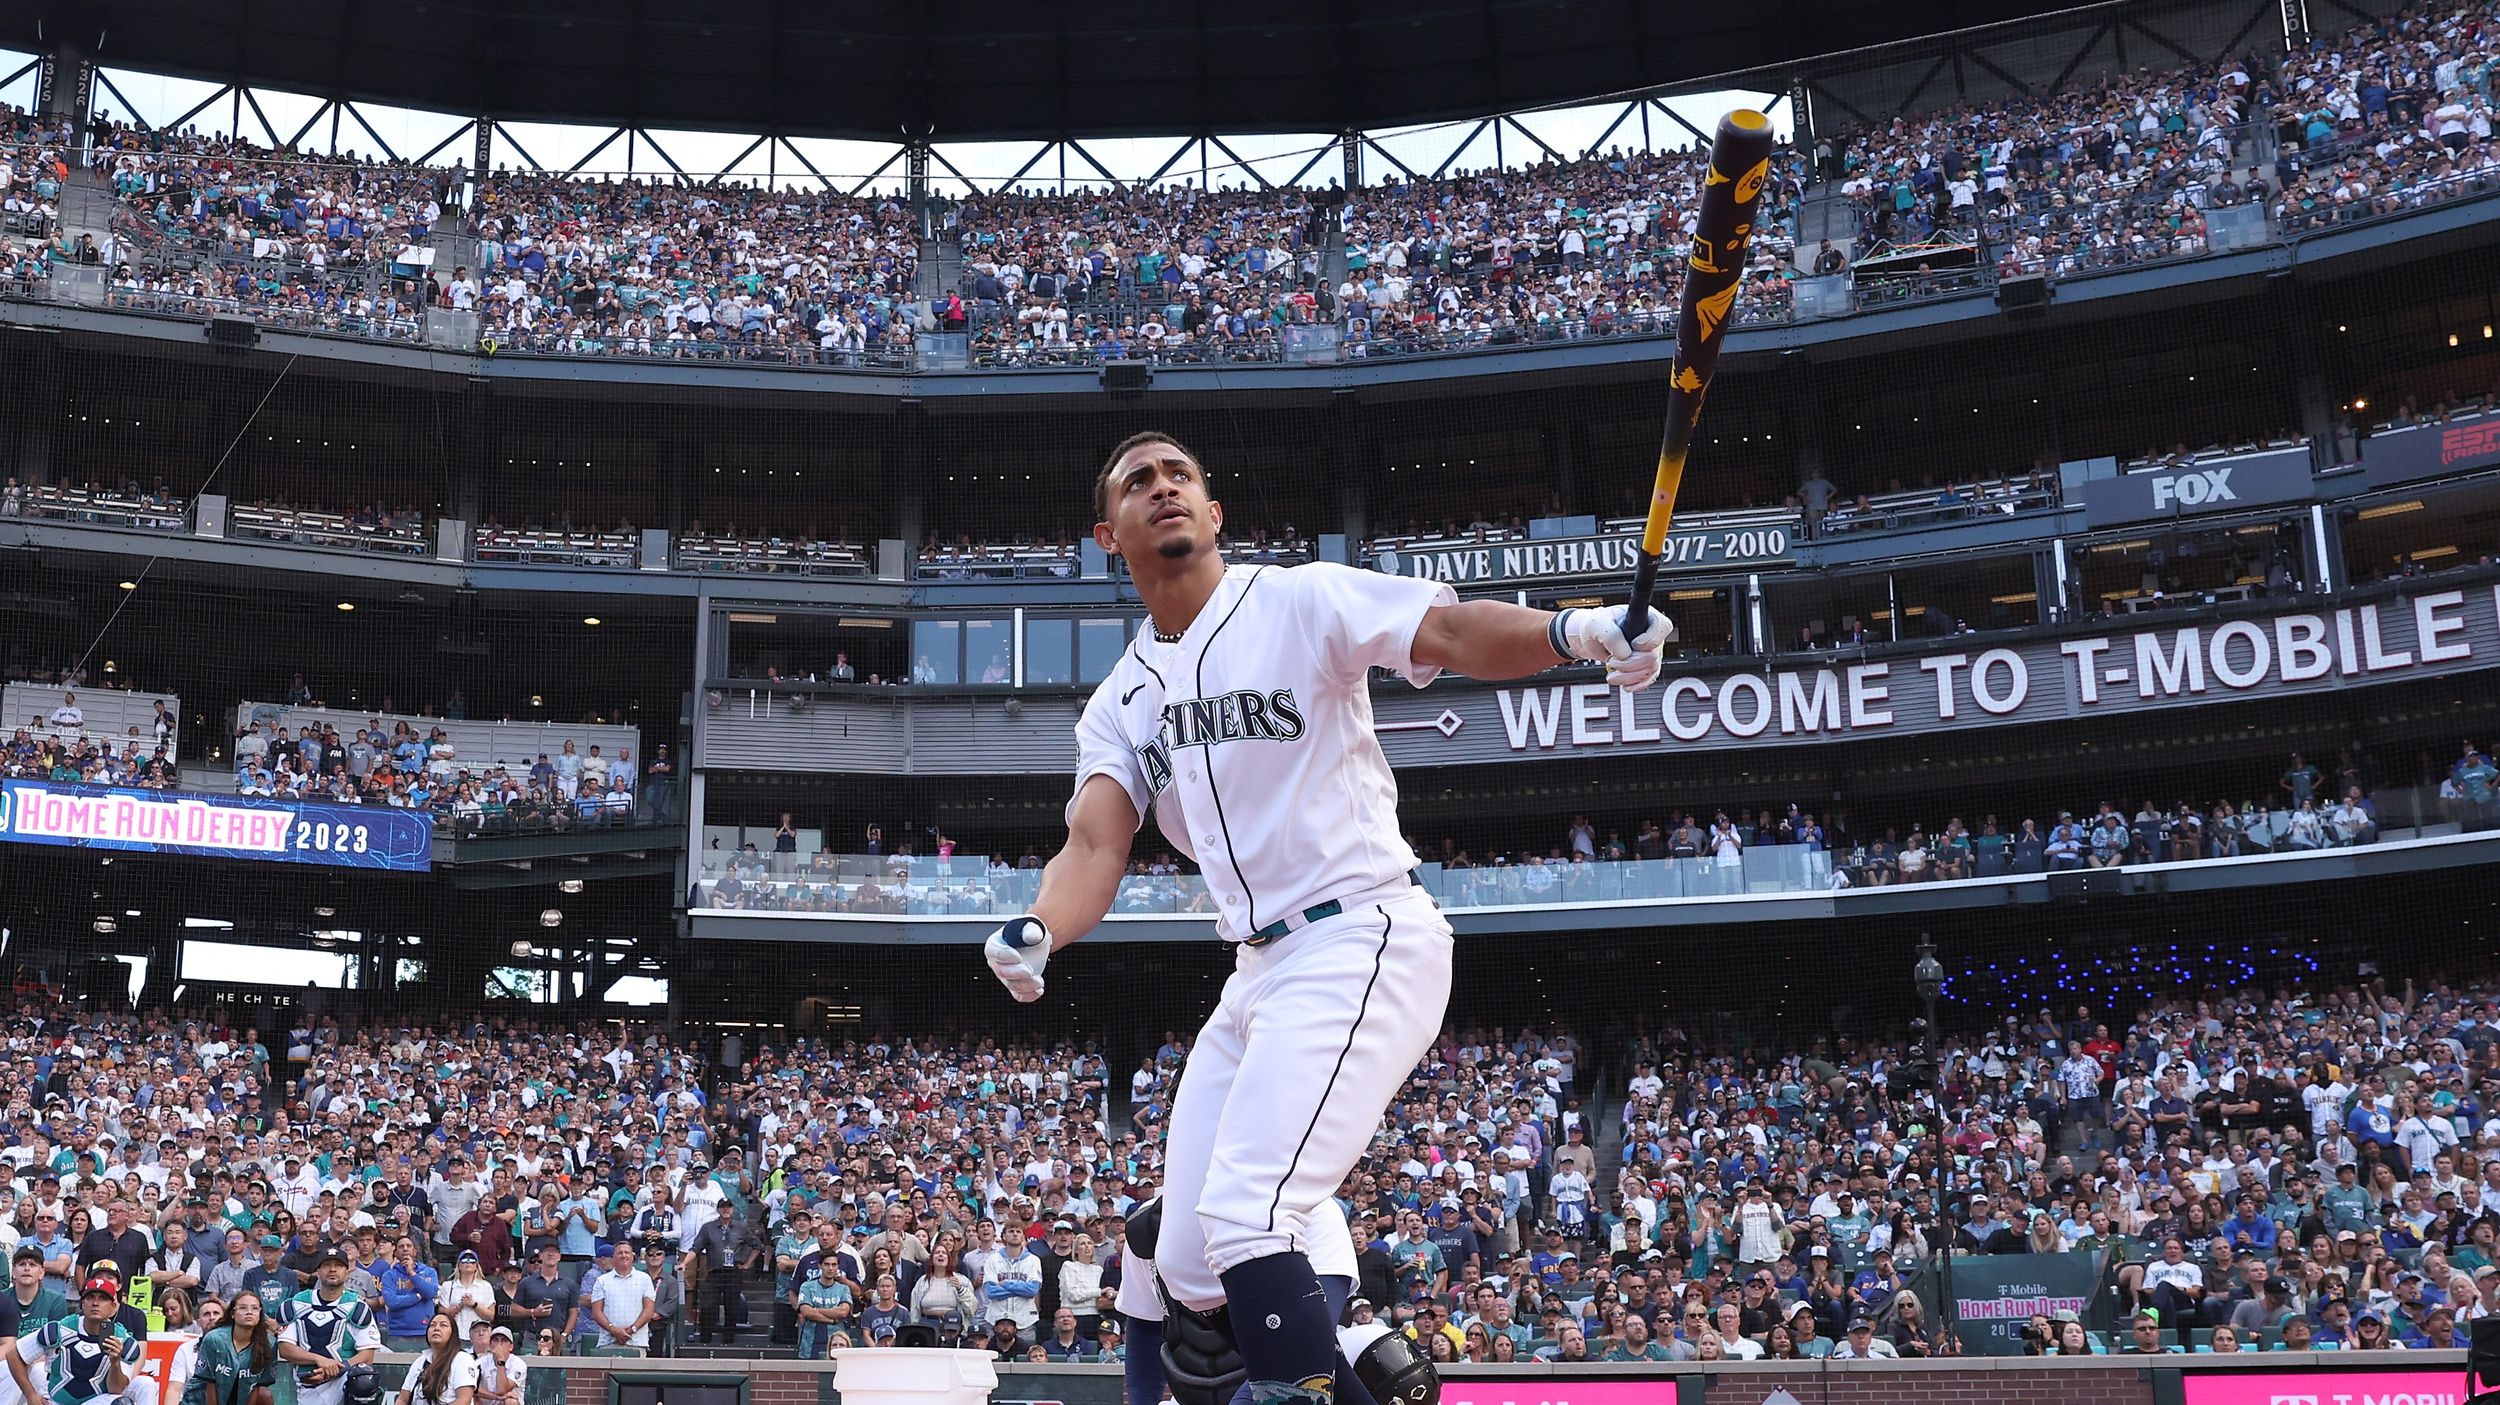 All Star Game: Home Run Derby, FanFest, and More